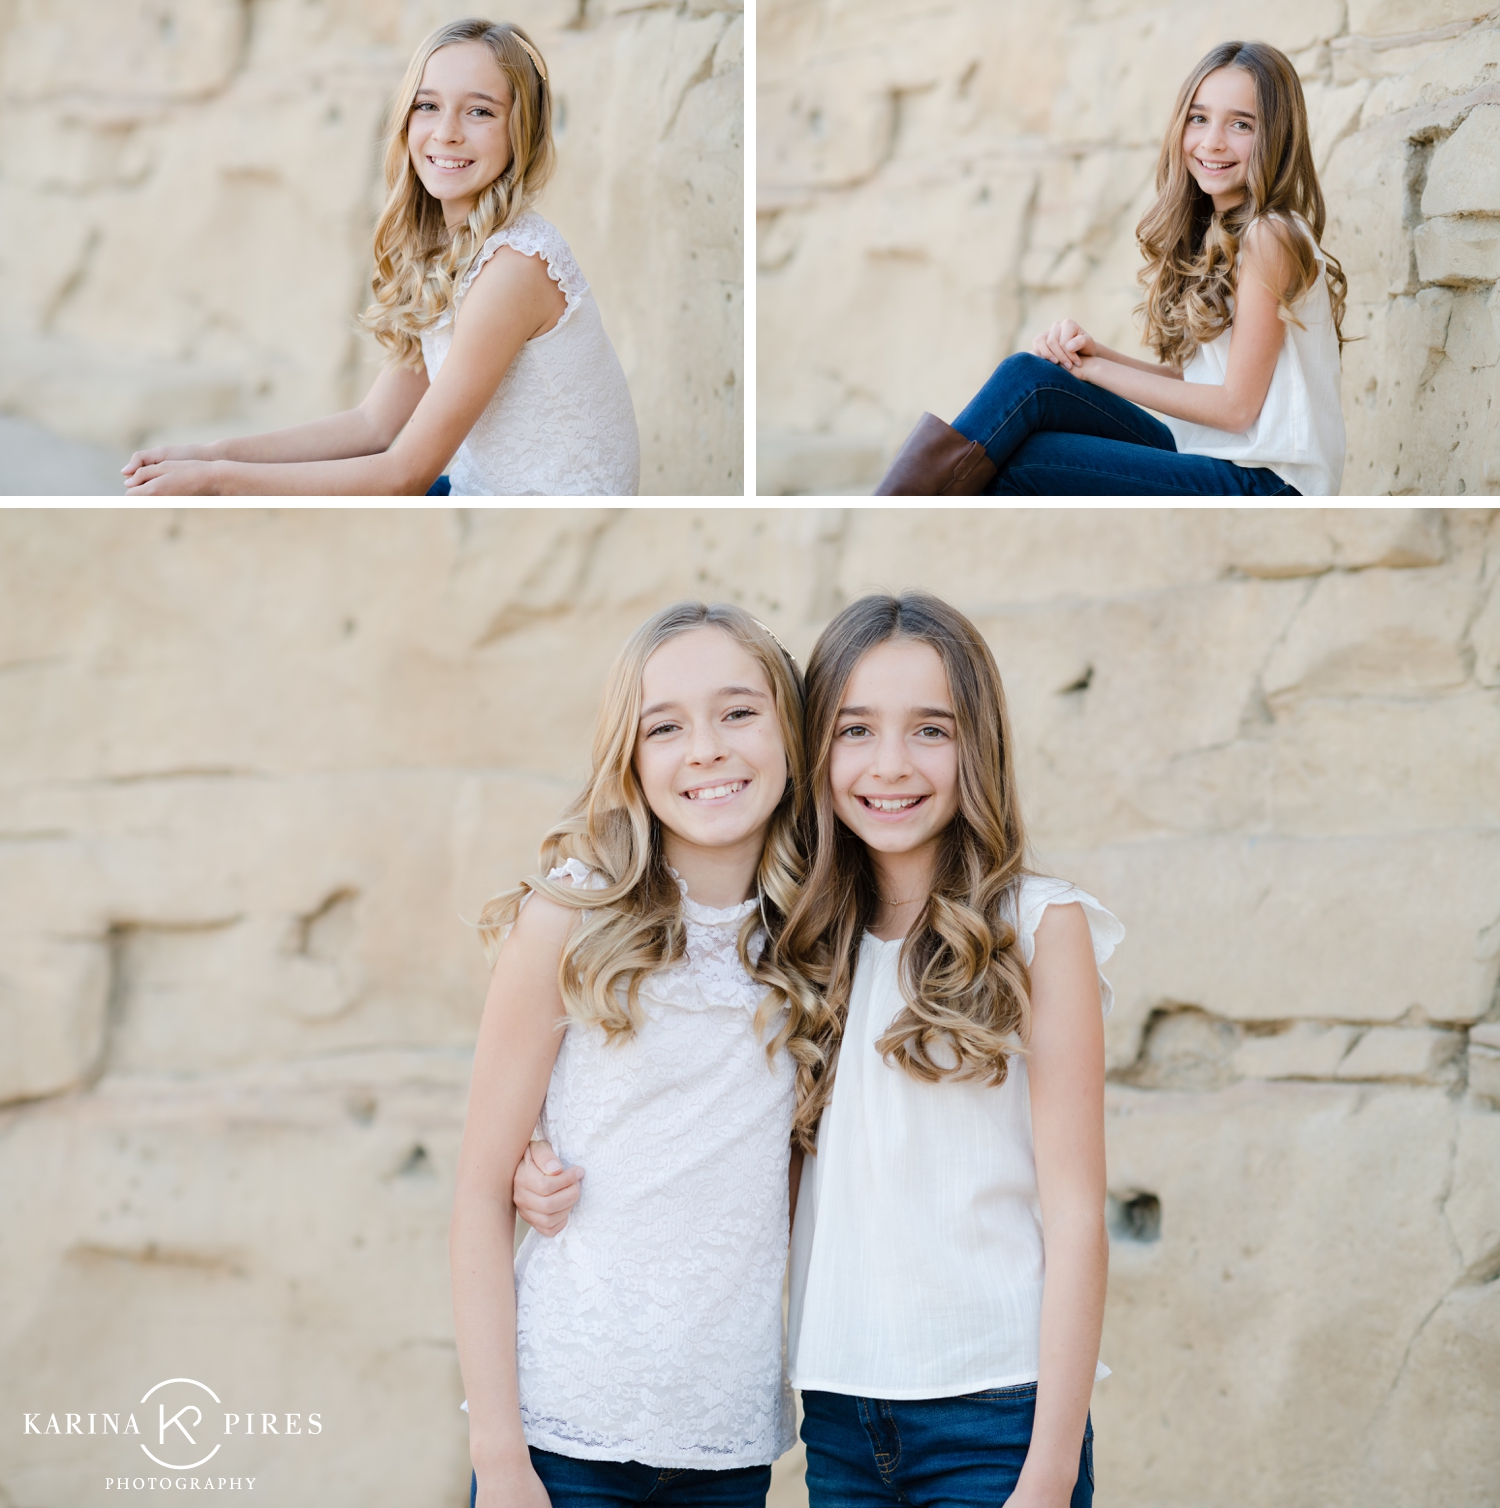 Family session at Quail Hill in Irvine, California